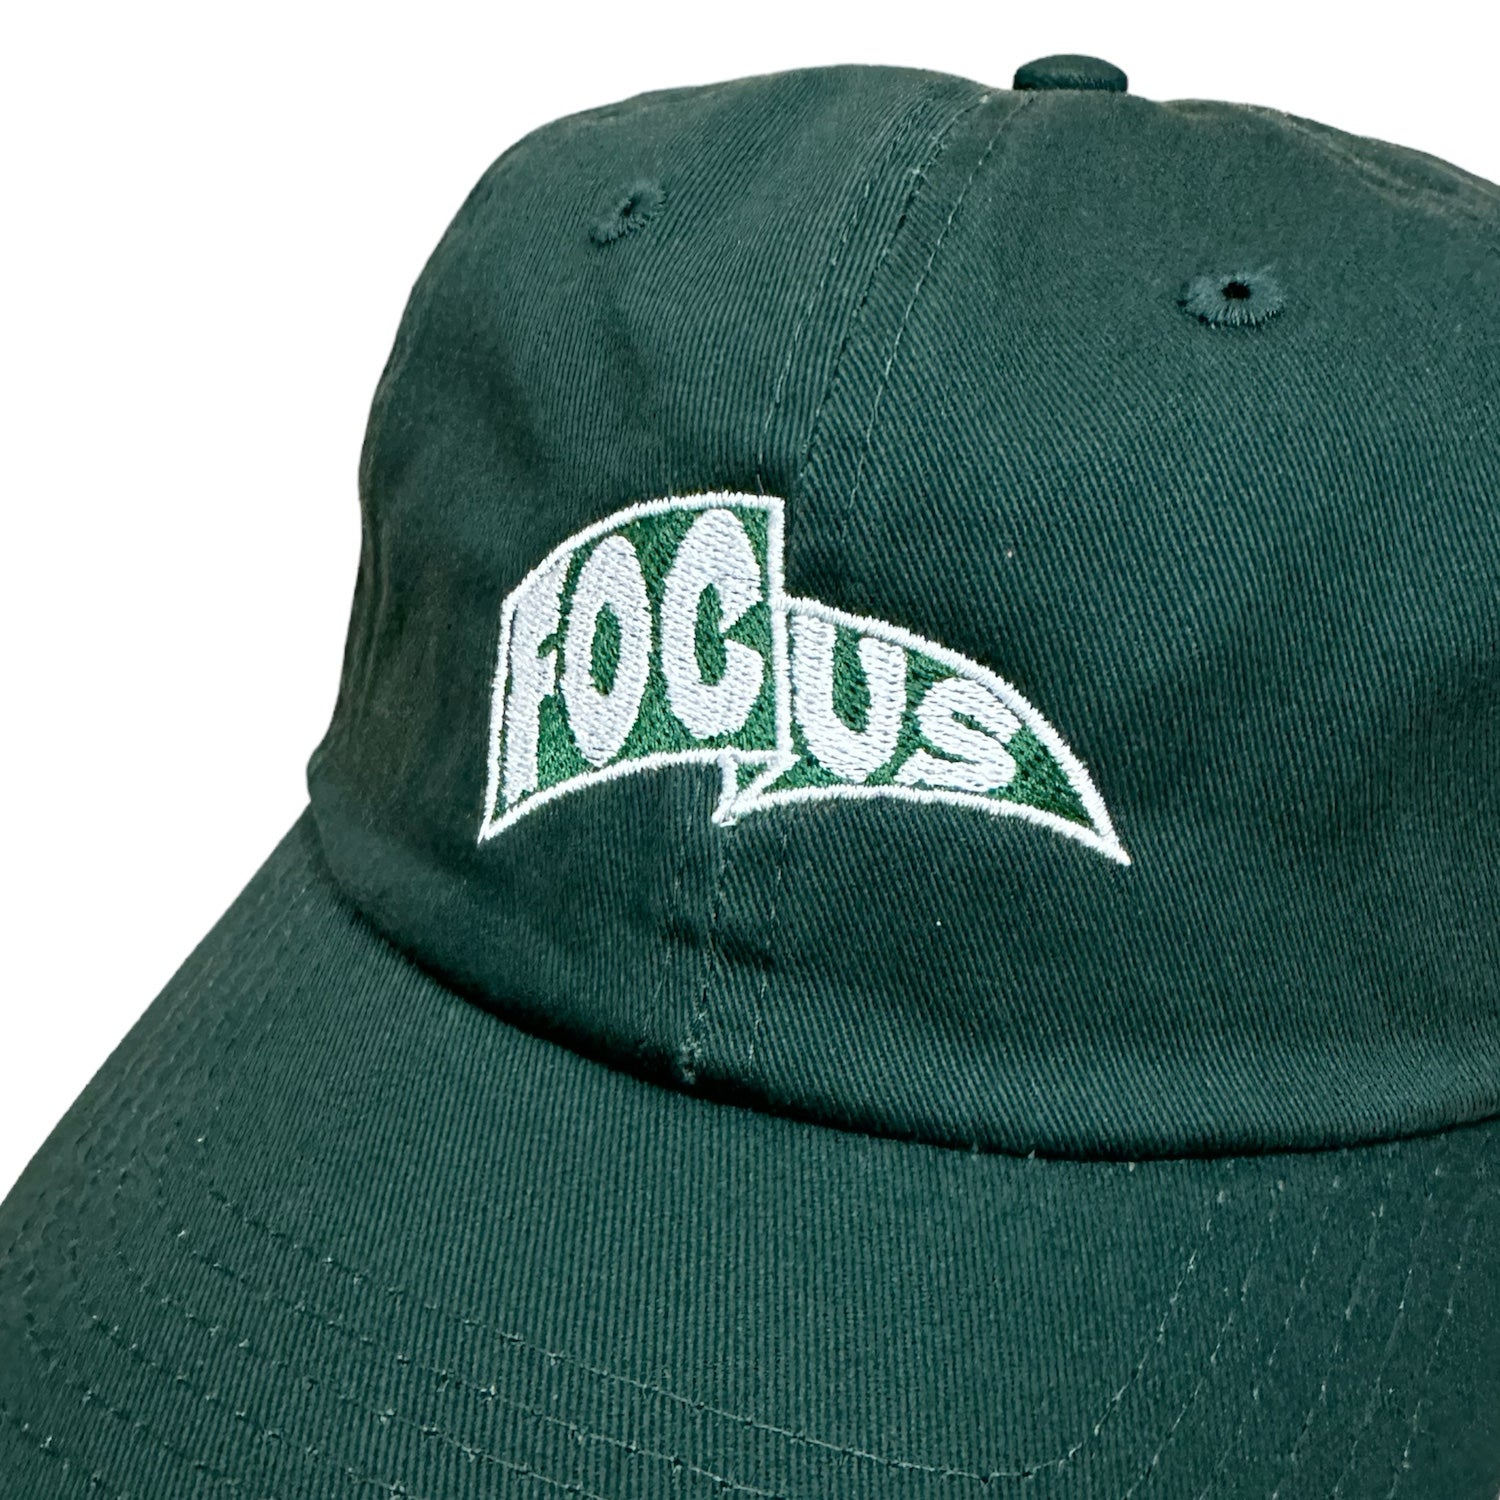 Fir green focus 6 panel cap with white and green focus pendant logo on front. Free uk shipping over £50